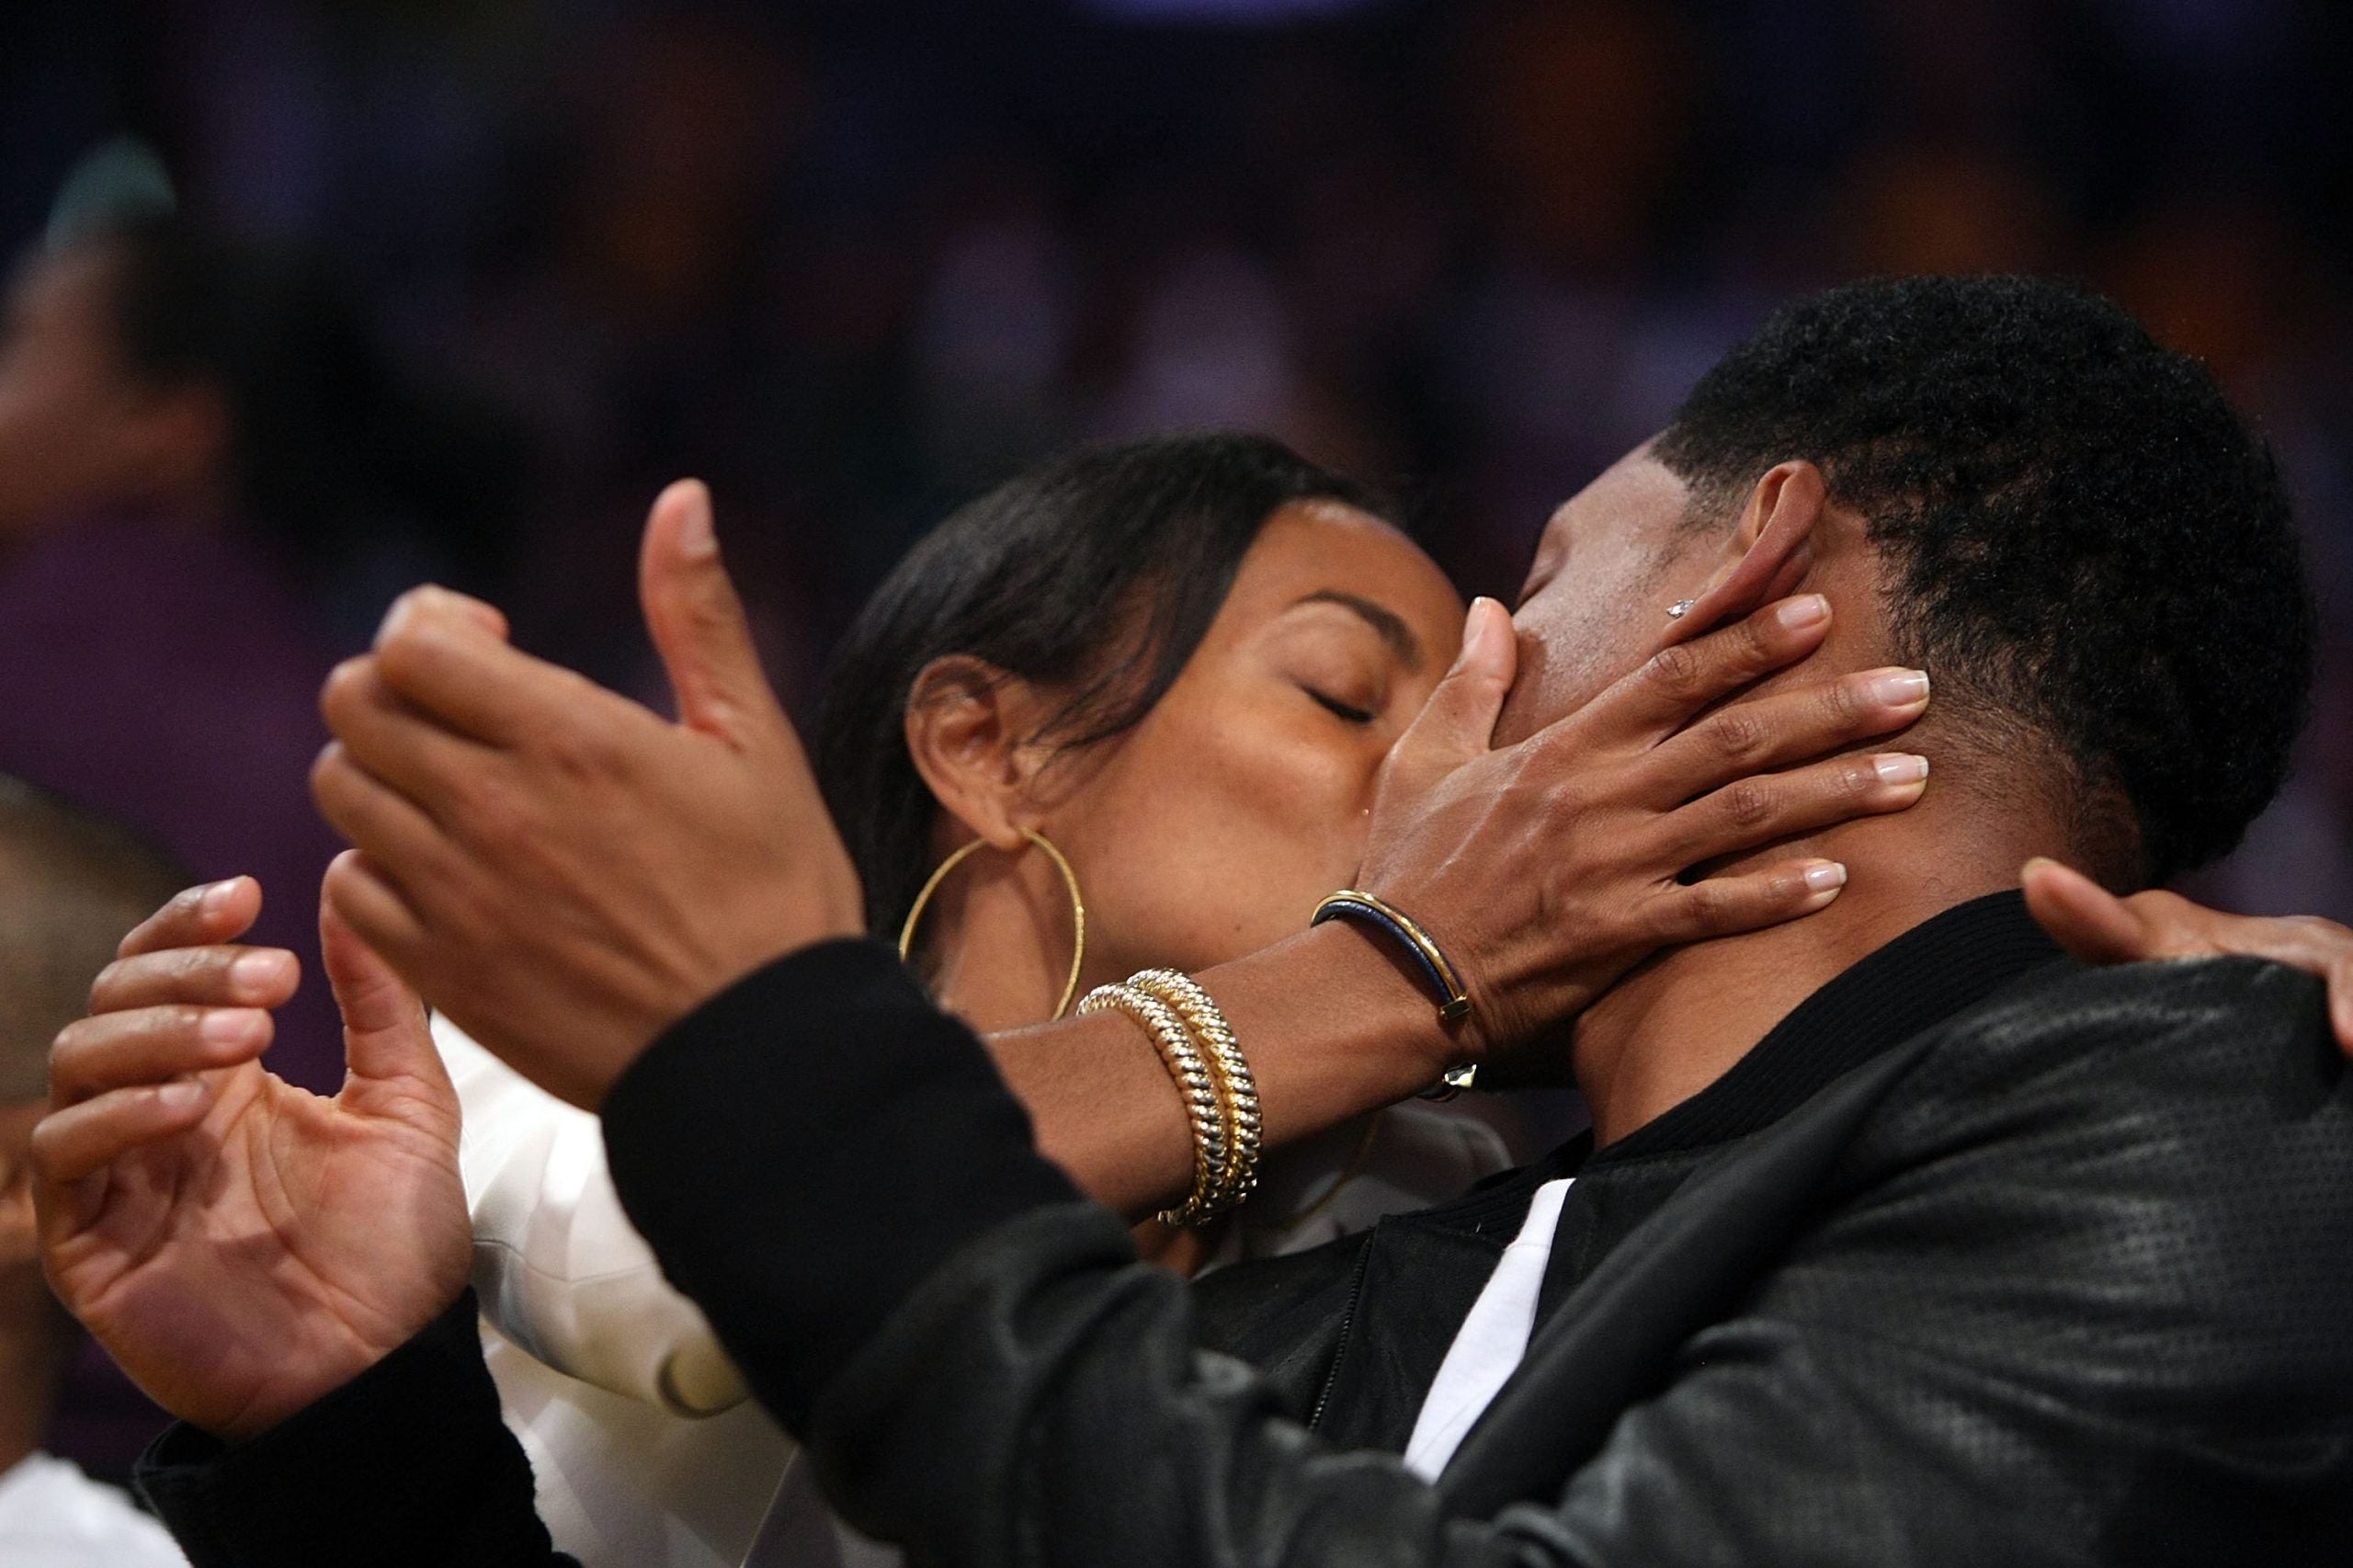 15 Photos Of Will & Jada Packing On The PDA